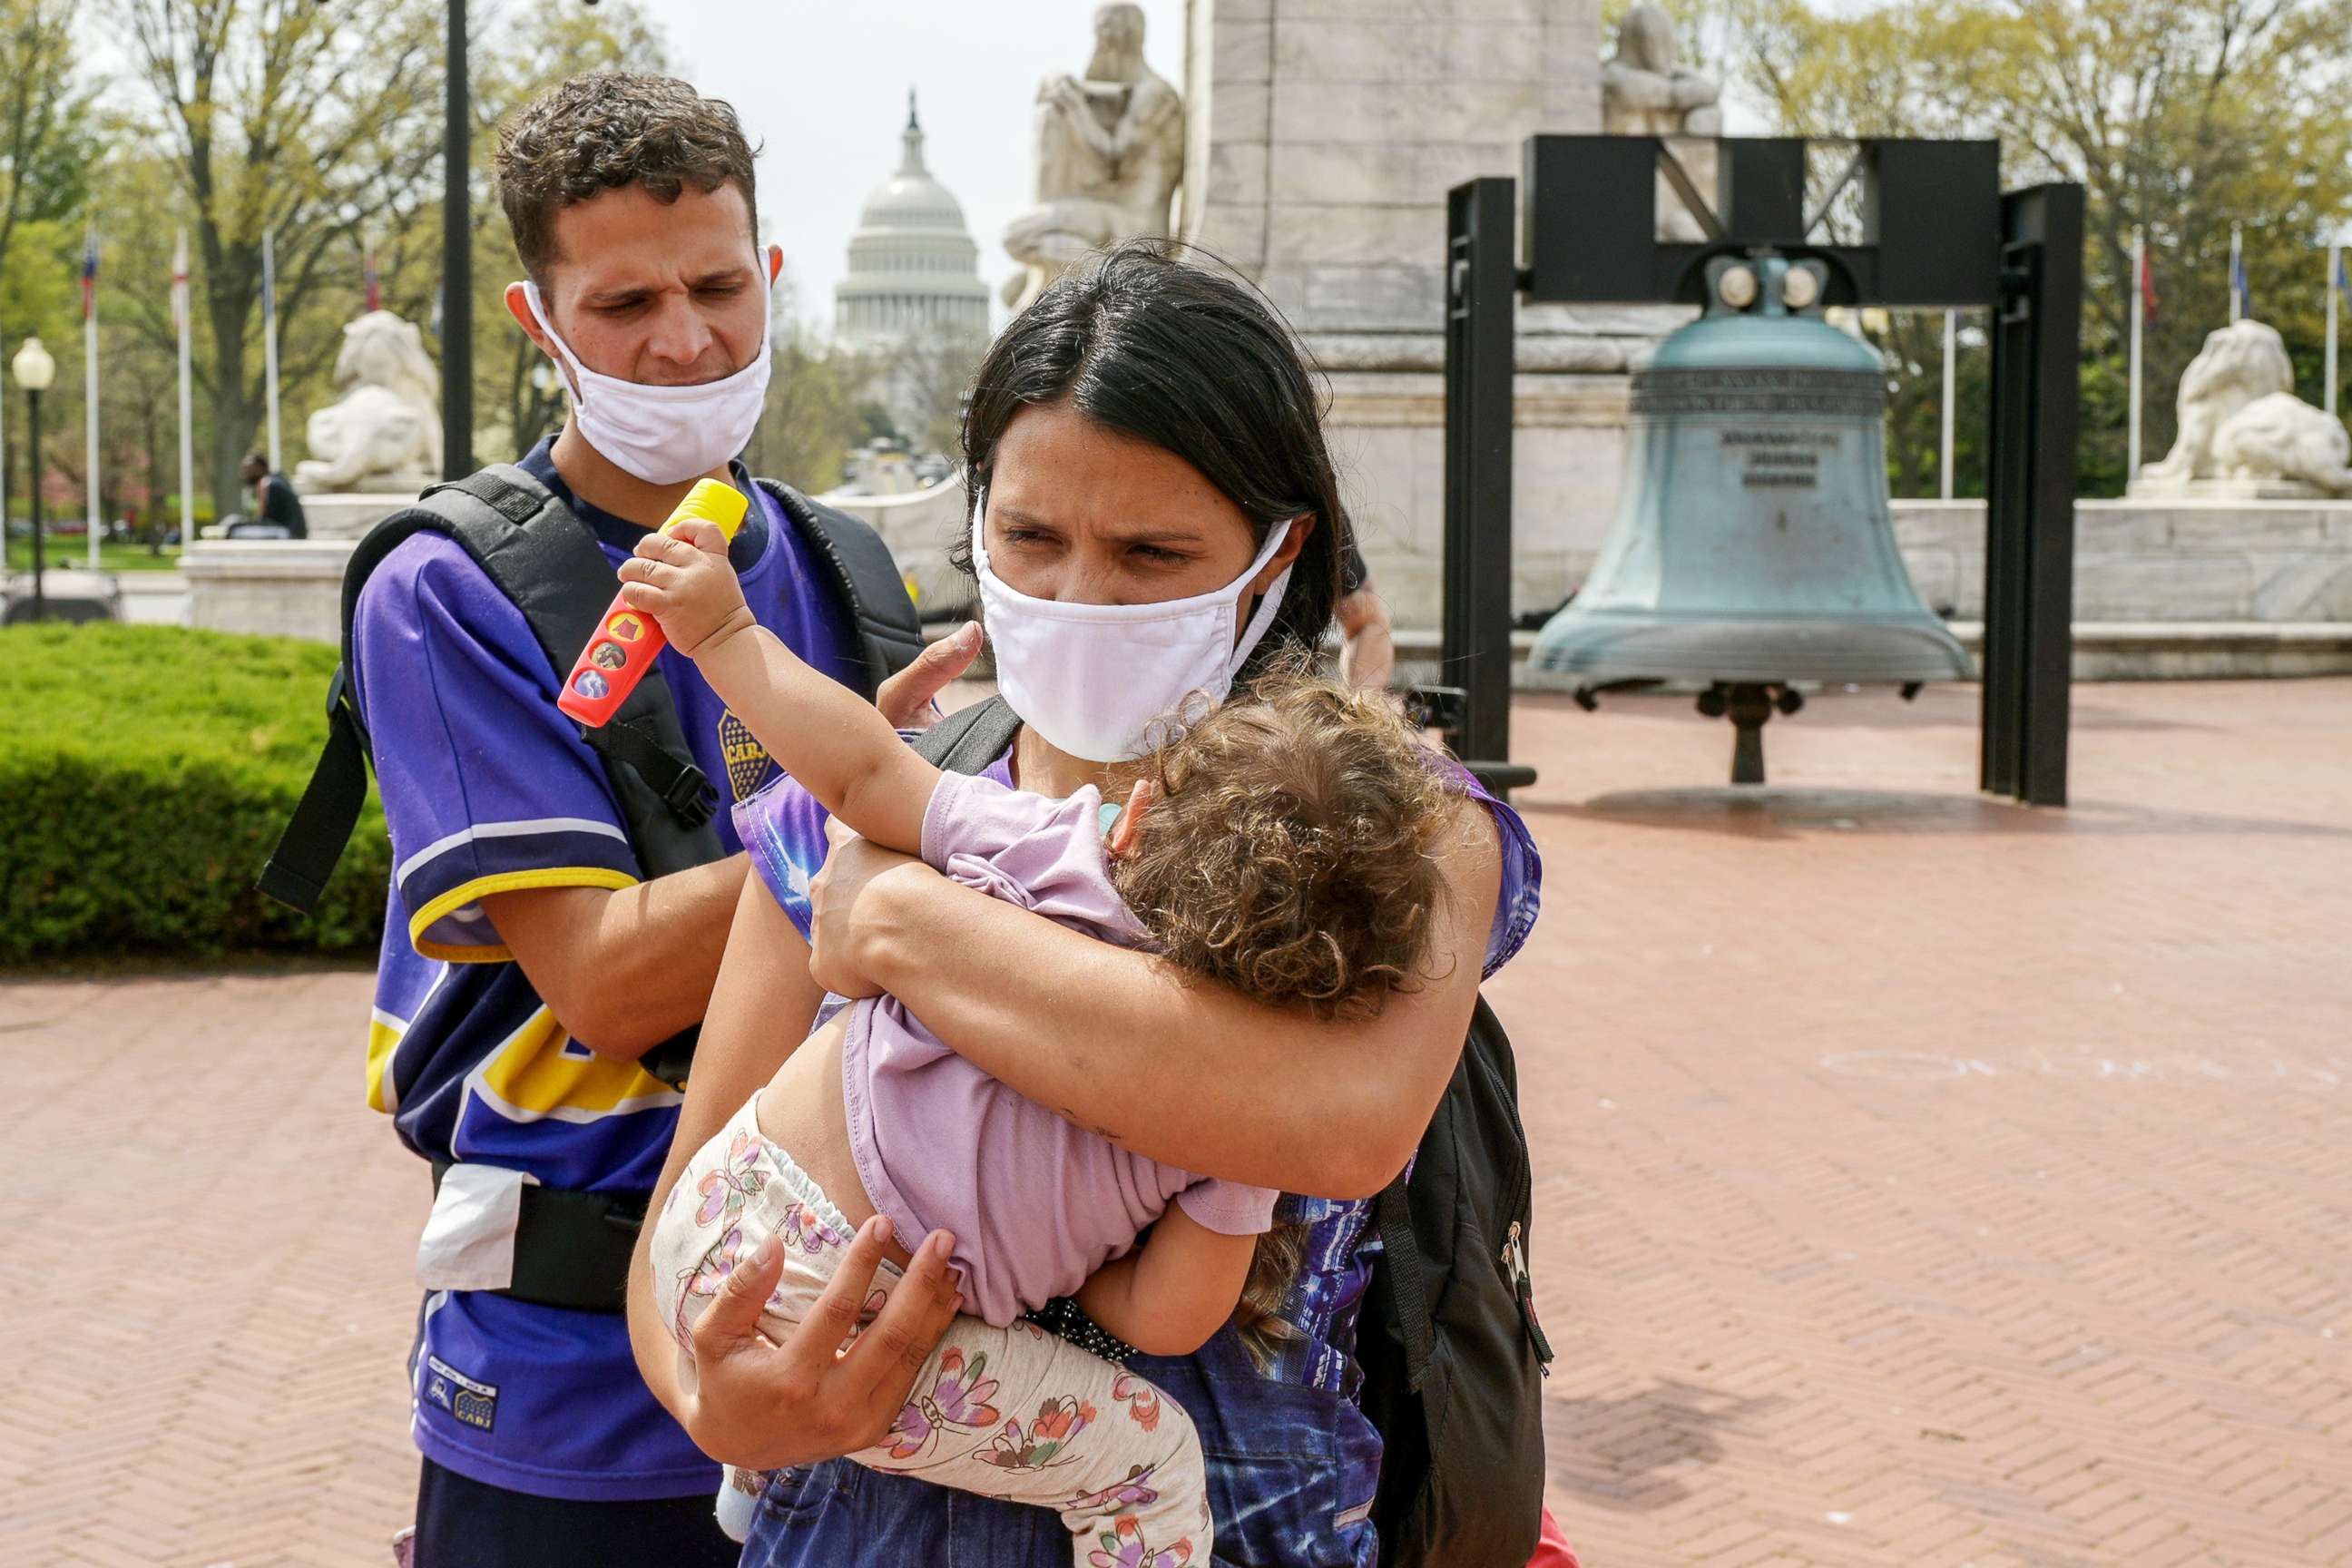 PHOTO: Ordalis Rodri­guez, 26, a migrant originally from Venezuela who was transported on a bus from Texas, holds her daughter Luciana, 1, as her husband Victor Rodri­guez, 27, looks on outside of Union Station in Washington, DC,  April 13, 2022. 